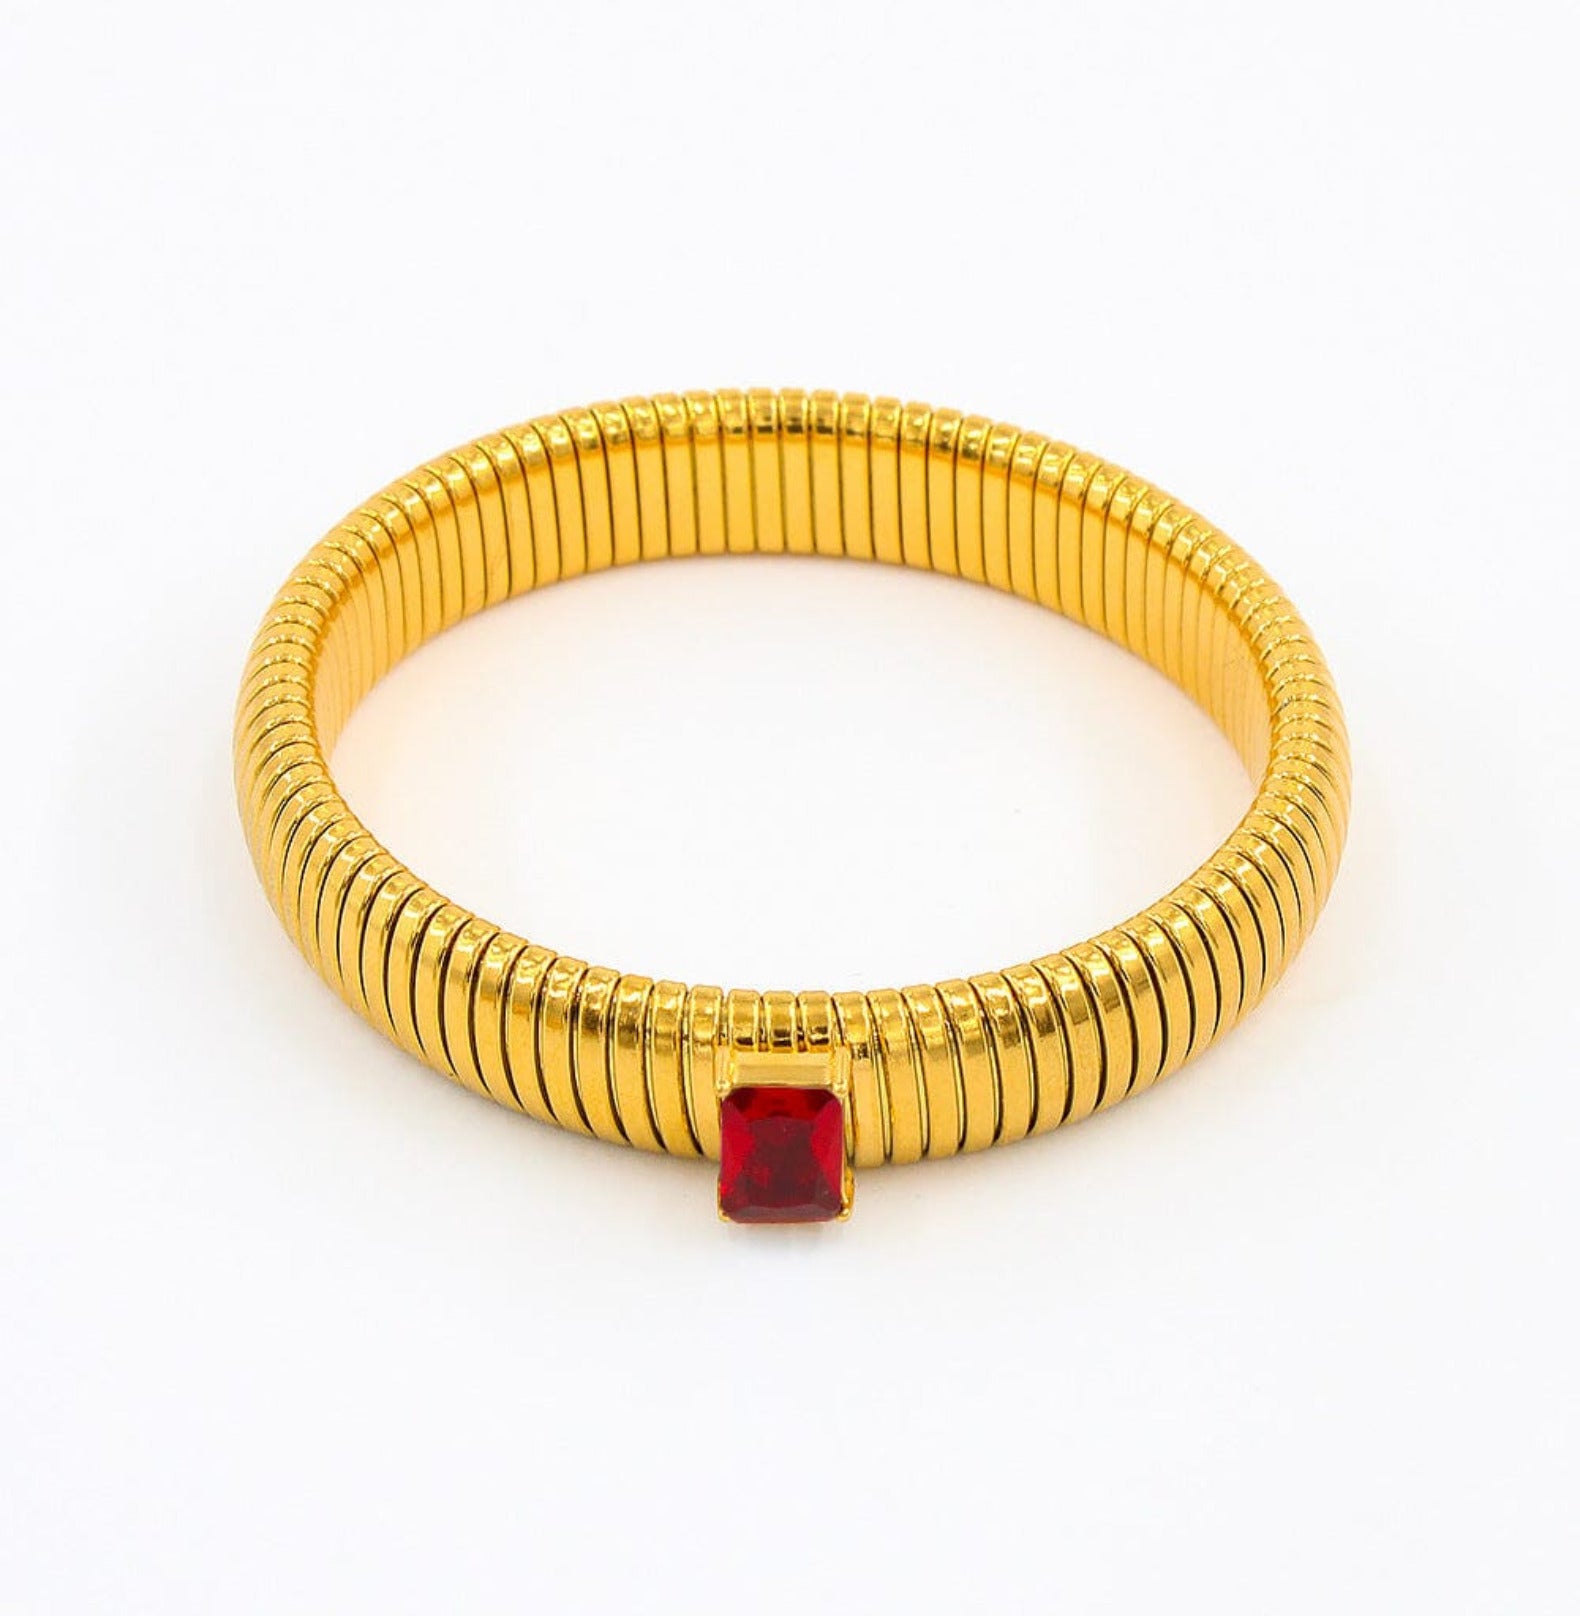 CHUNKY STONE BANGLE BRACELET - GOLD braclet Yubama Jewelry Online Store - The Elegant Designs of Gold and Silver ! Red Diamond 12mm 18cm 